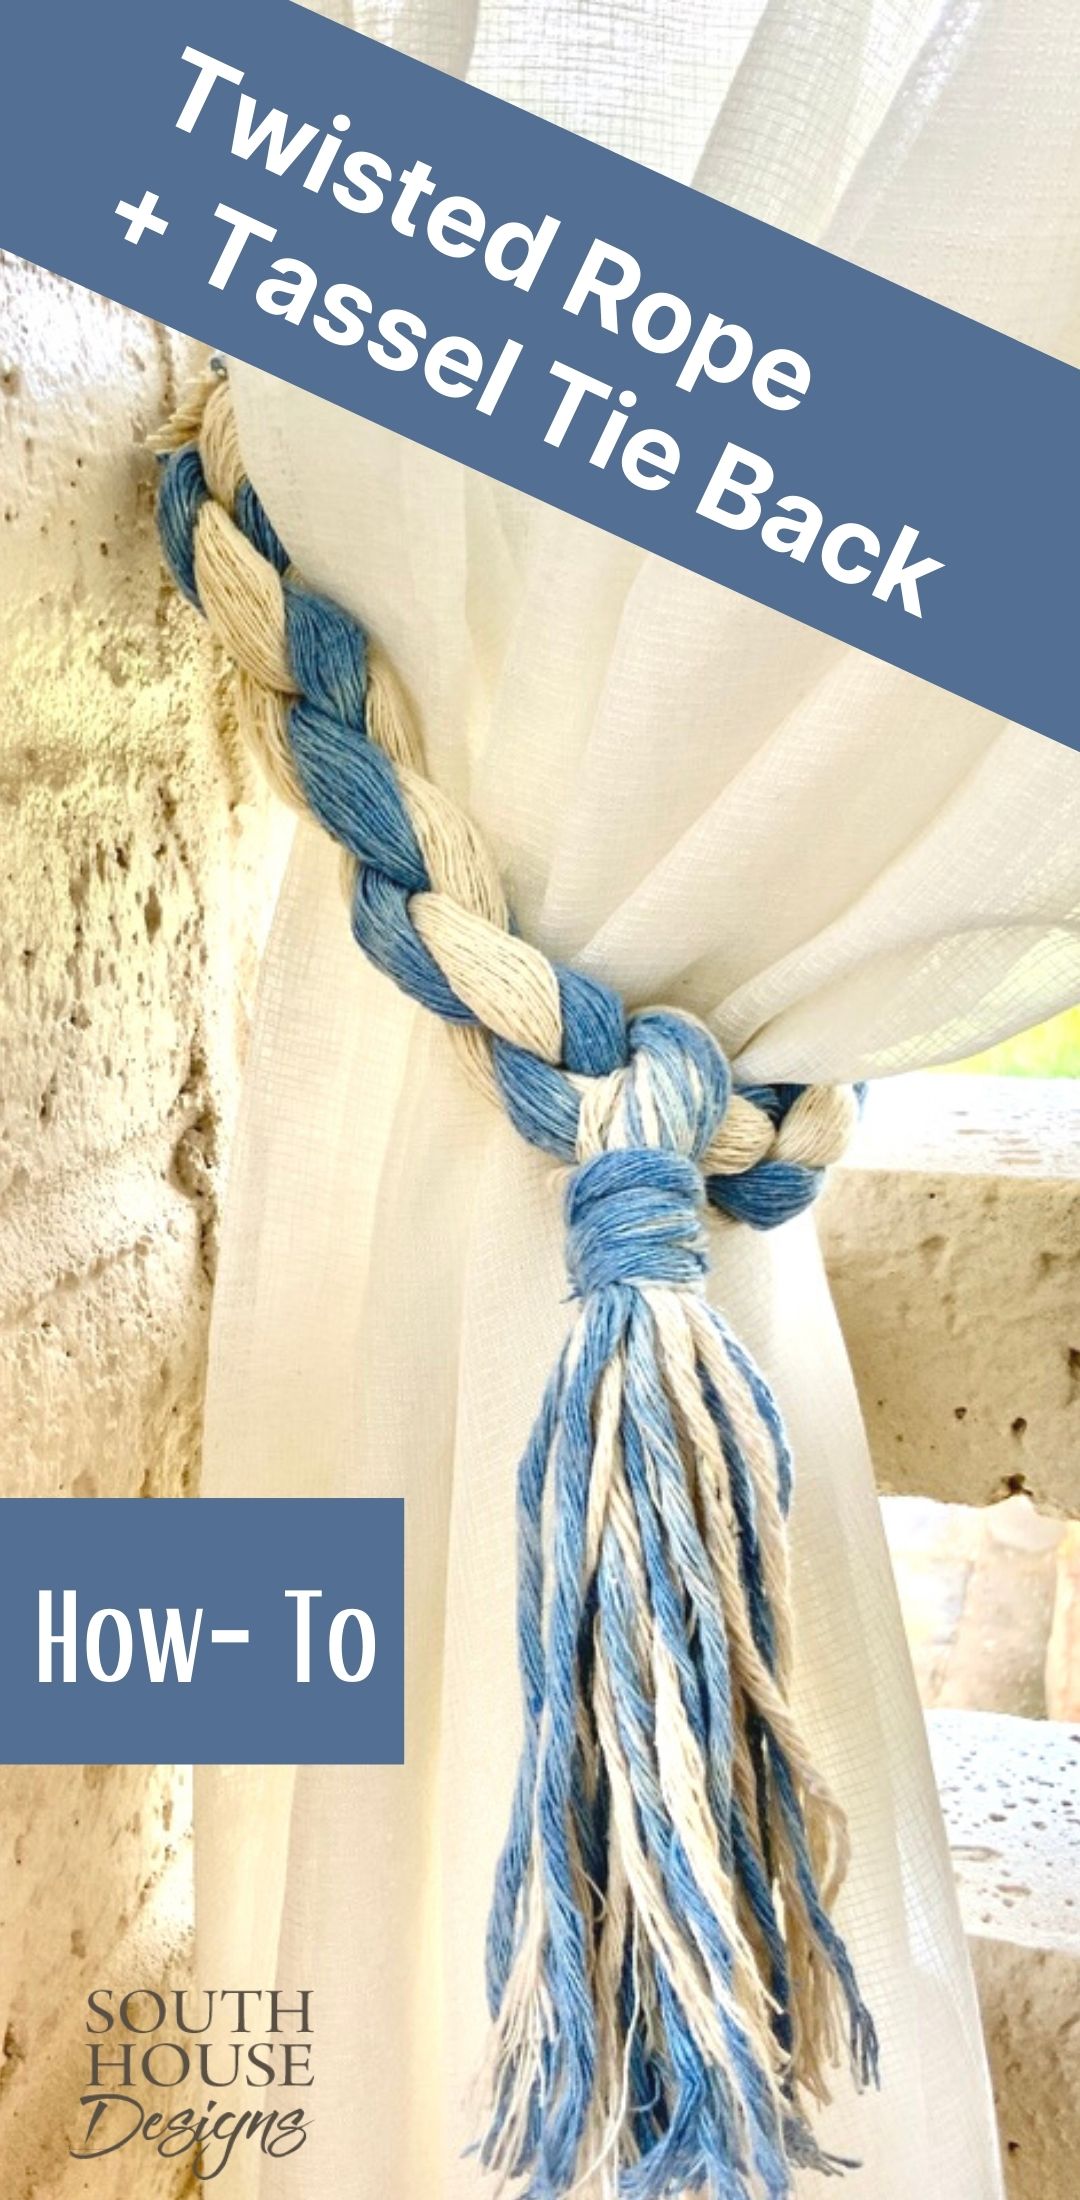 Pinterest Pin showing The Finished Tie Back with a sheer curtain against a cream colored brick screen With a title of "How-To Twisted Rope + Tassel Tie Back 